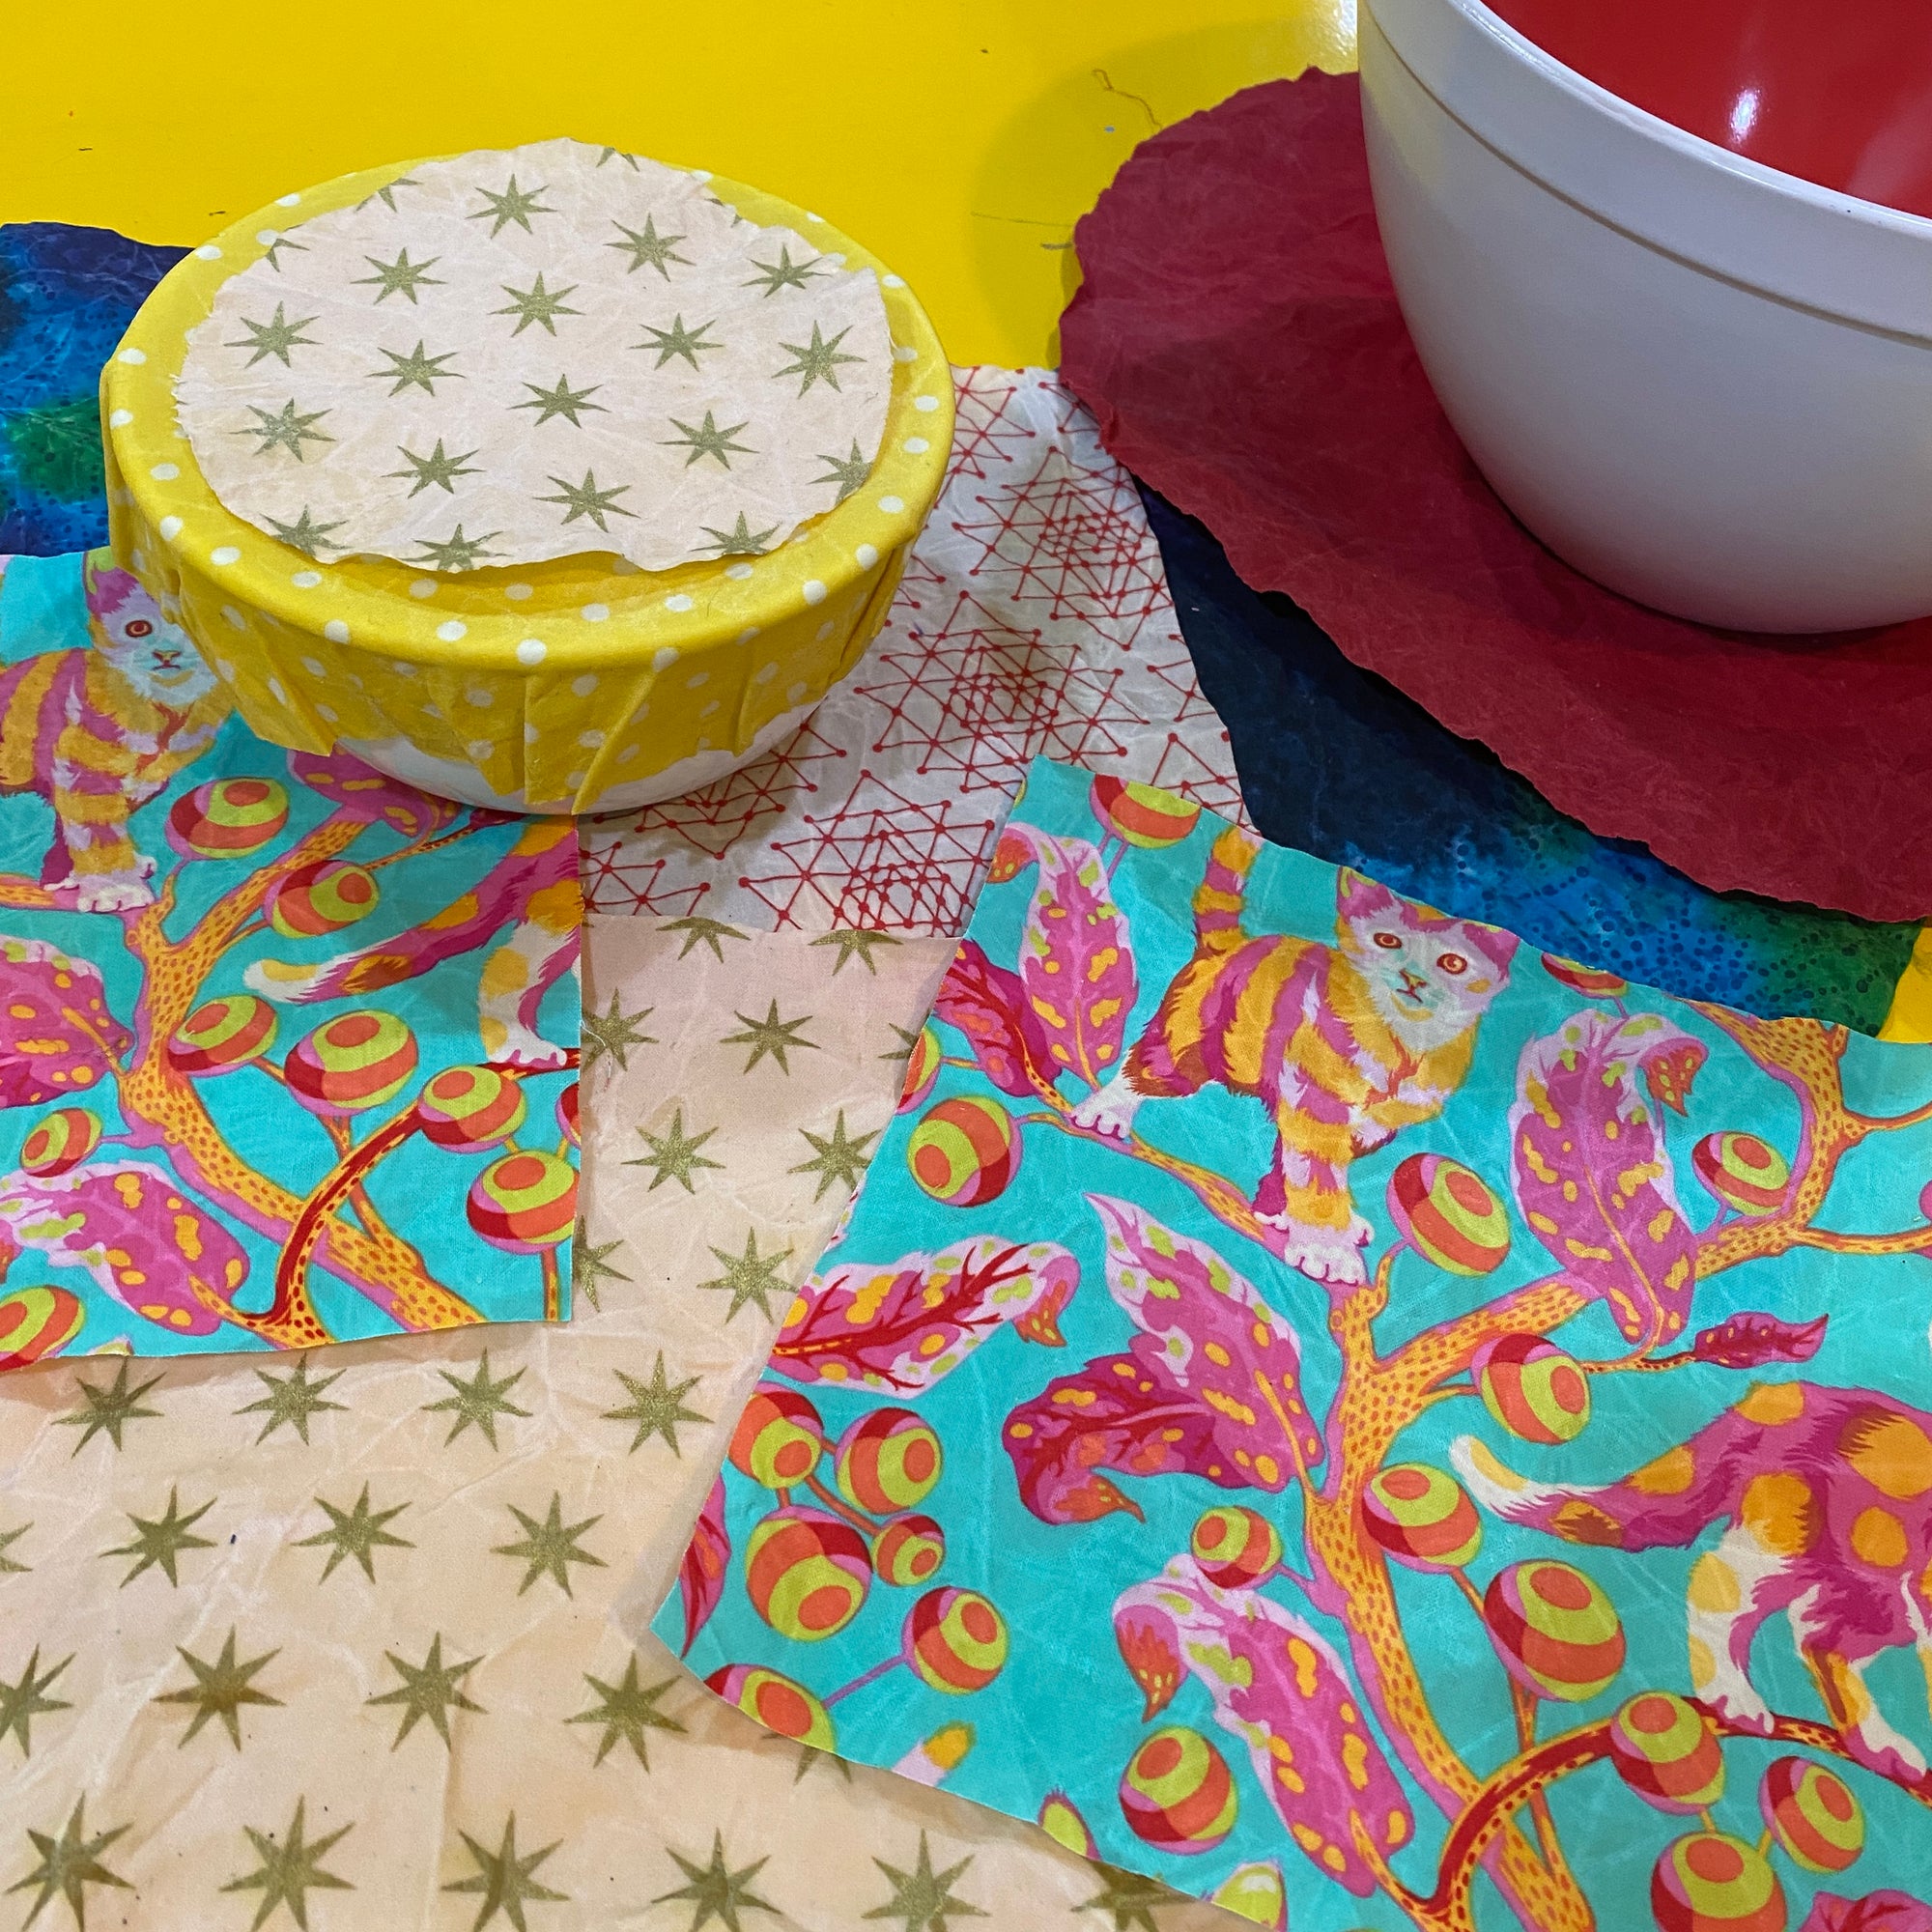 SUSTAINABILITY CLASS: Beeswax Wraps